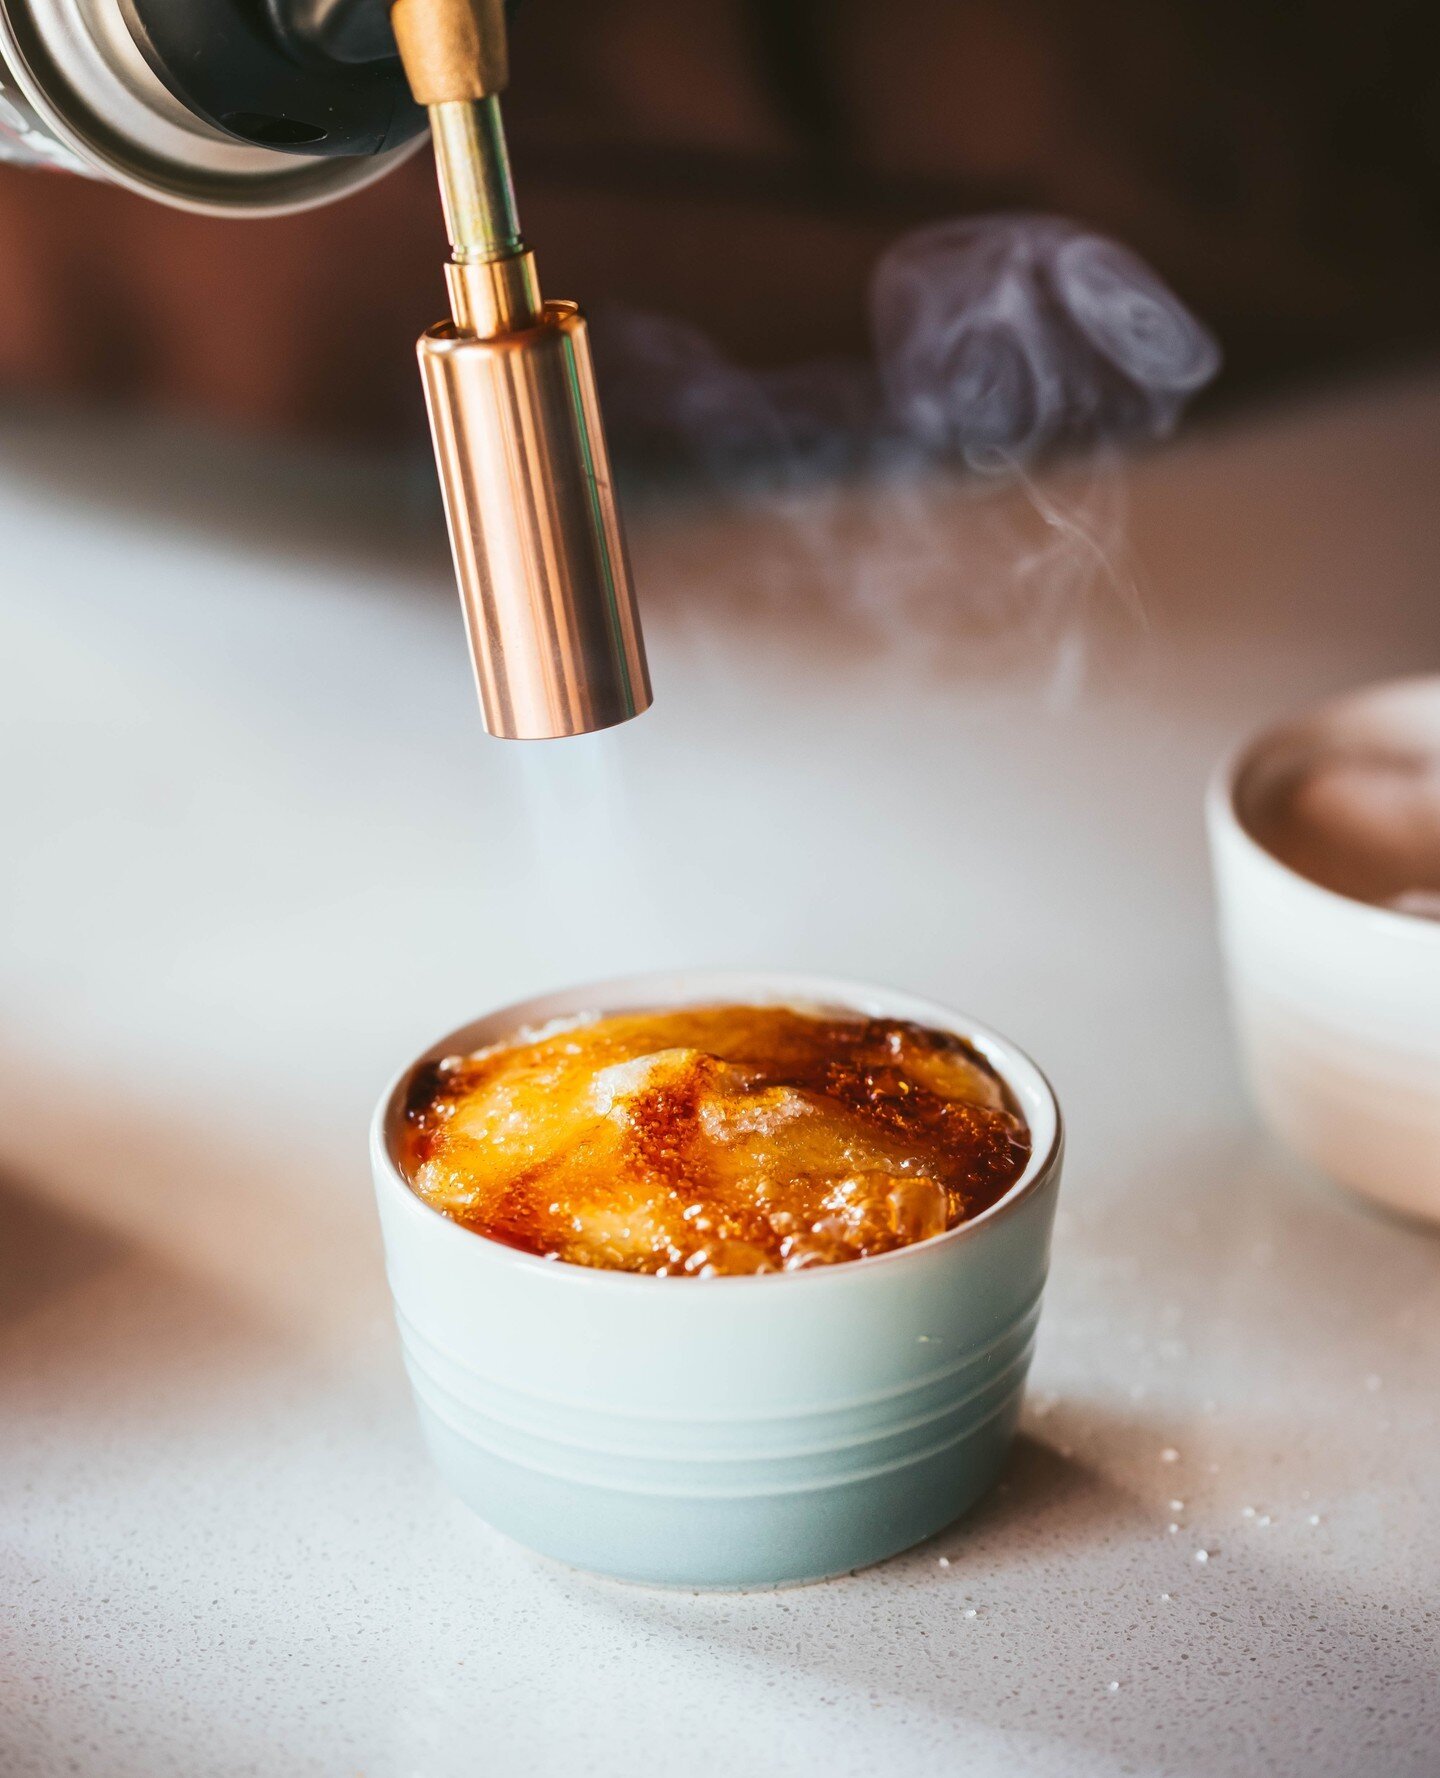 Creme Br&ucirc;l&eacute;e at home has never been easier. ⁠
⁠
Pop our Vanilla Bean Br&ucirc;l&eacute;e into a ramekin, sprinkle a thin layer of sugar and blowtorch or broil until sugar melts and browns. ⁠
⁠
Et voil&agrave;! You have a delicious French